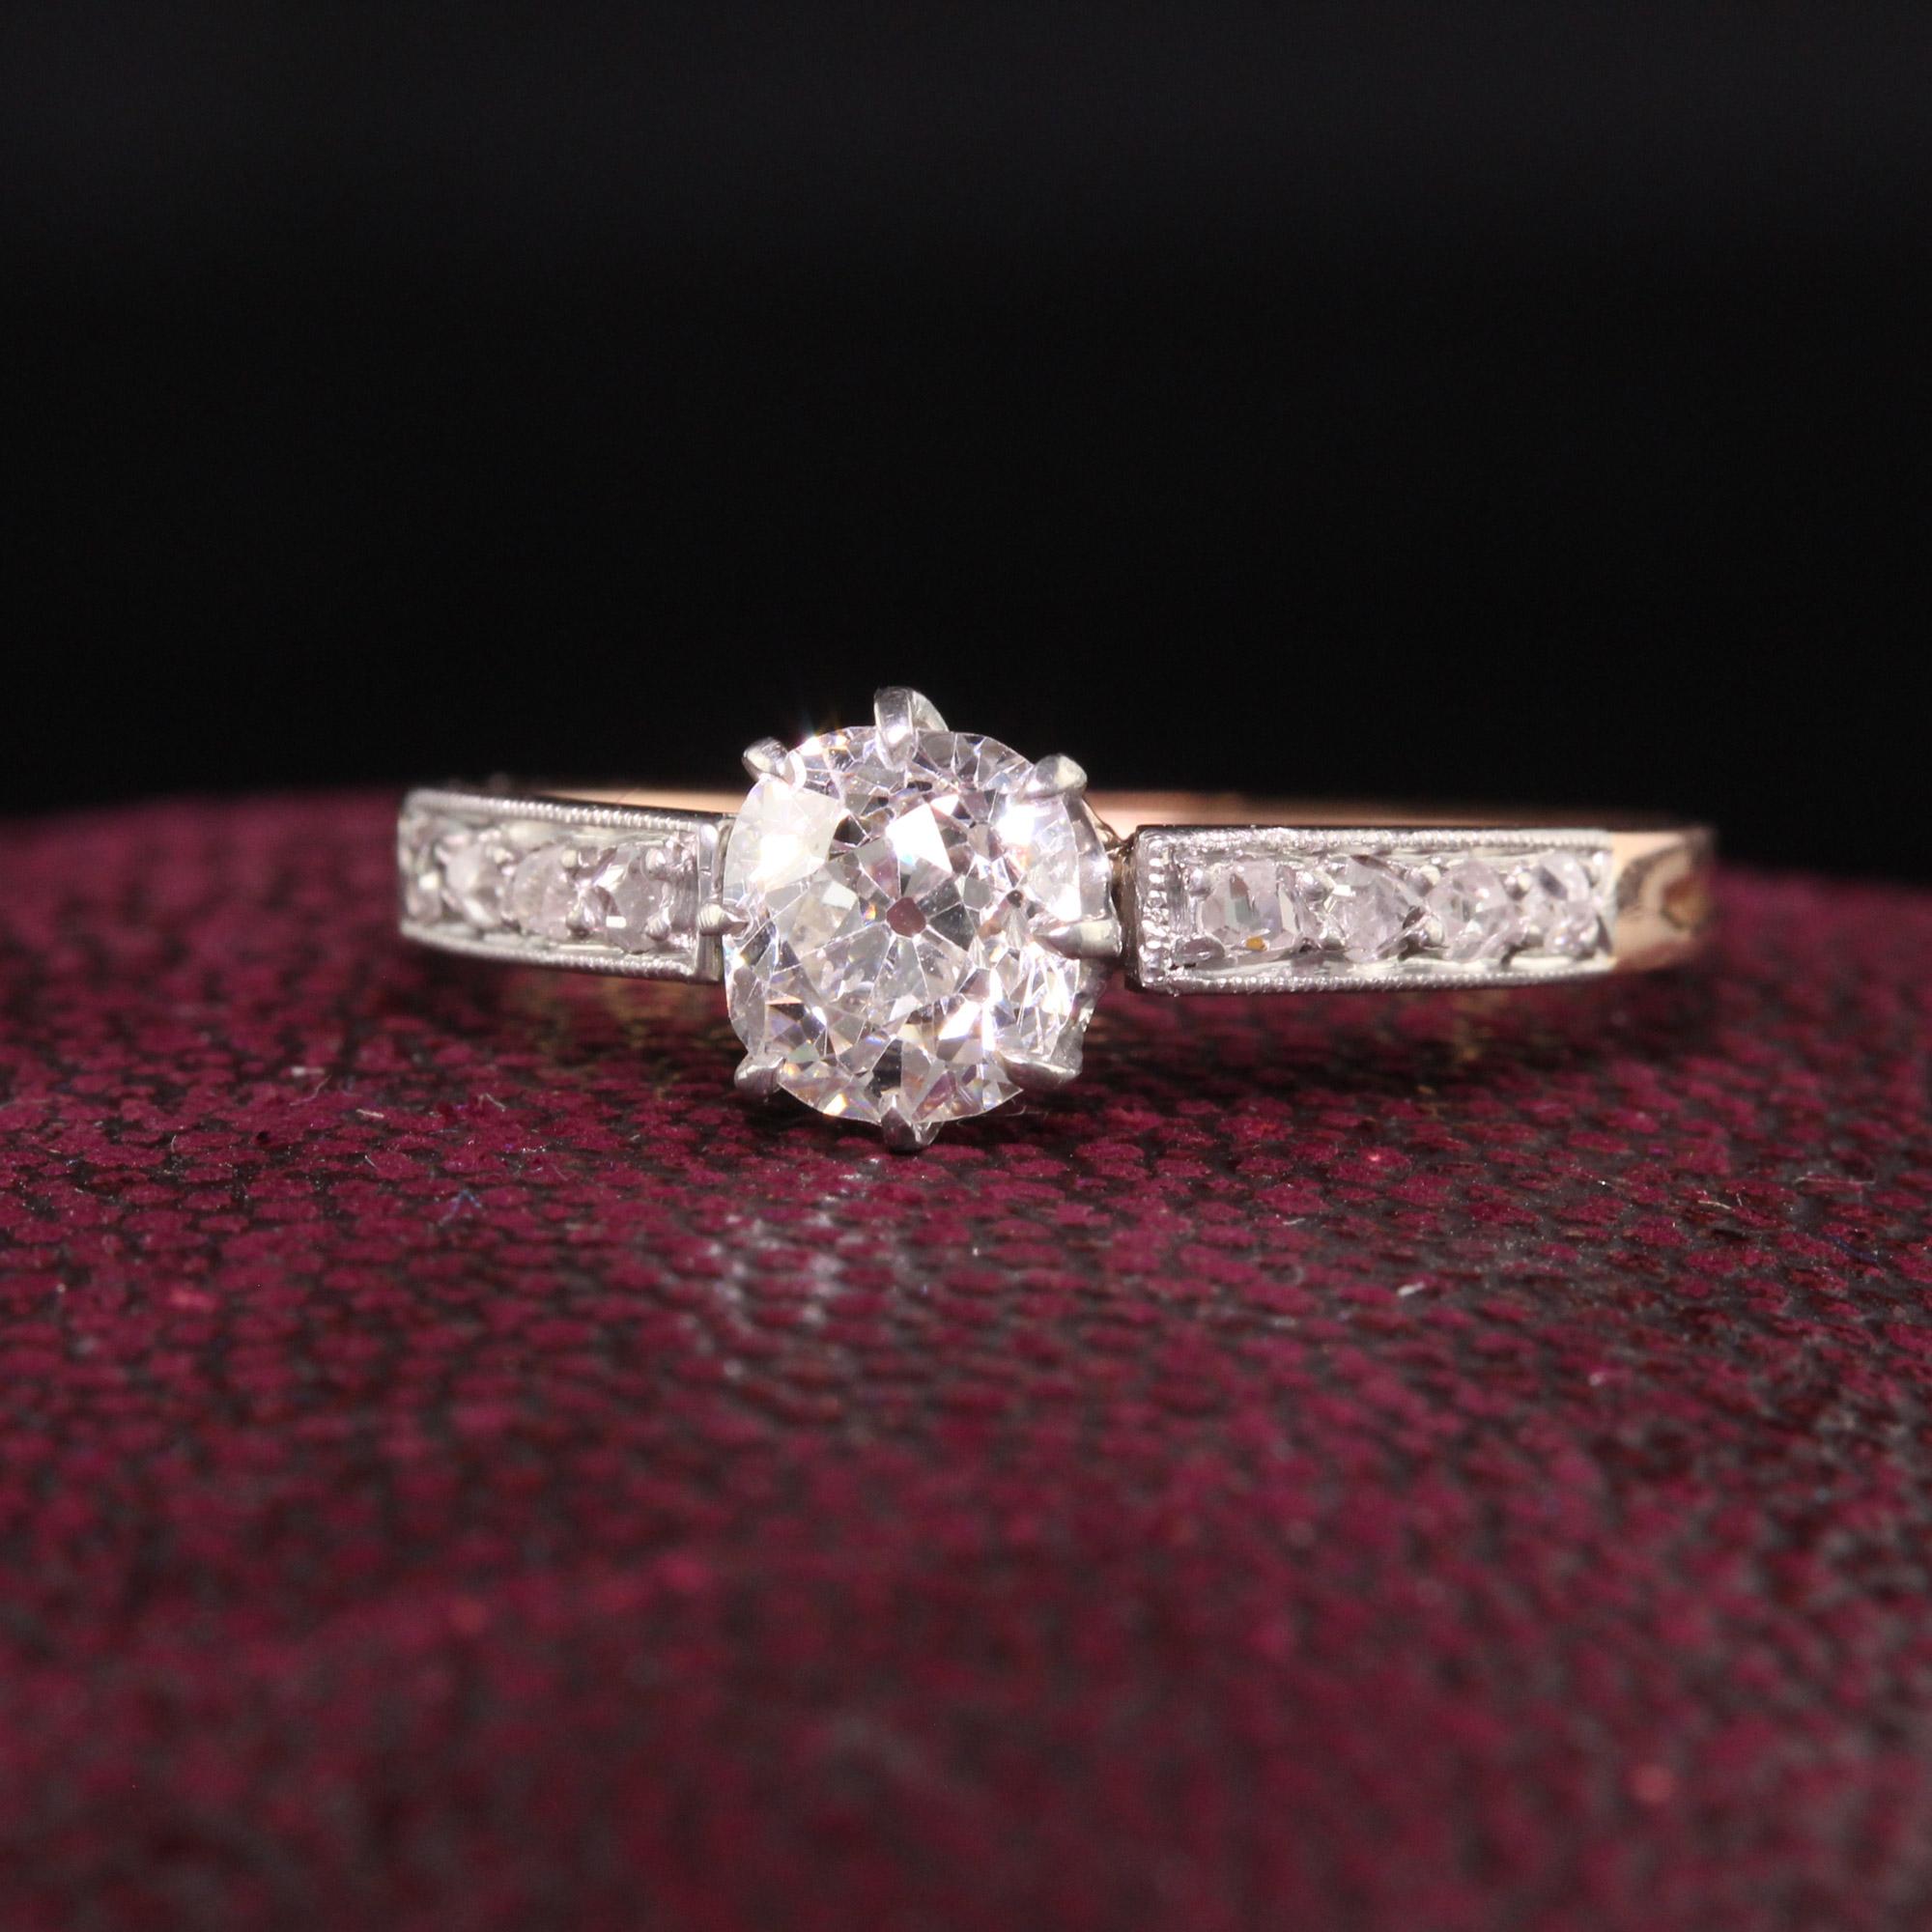 Beautiful Antique Edwardian French 18K Rose Gold Platinum Old Mine Diamond Engagement Ring. This incredible engagement ring is crafted in 18k rose gold and platinum top. The ring has an old mine cut diamond in the center and chunky old rose cuts